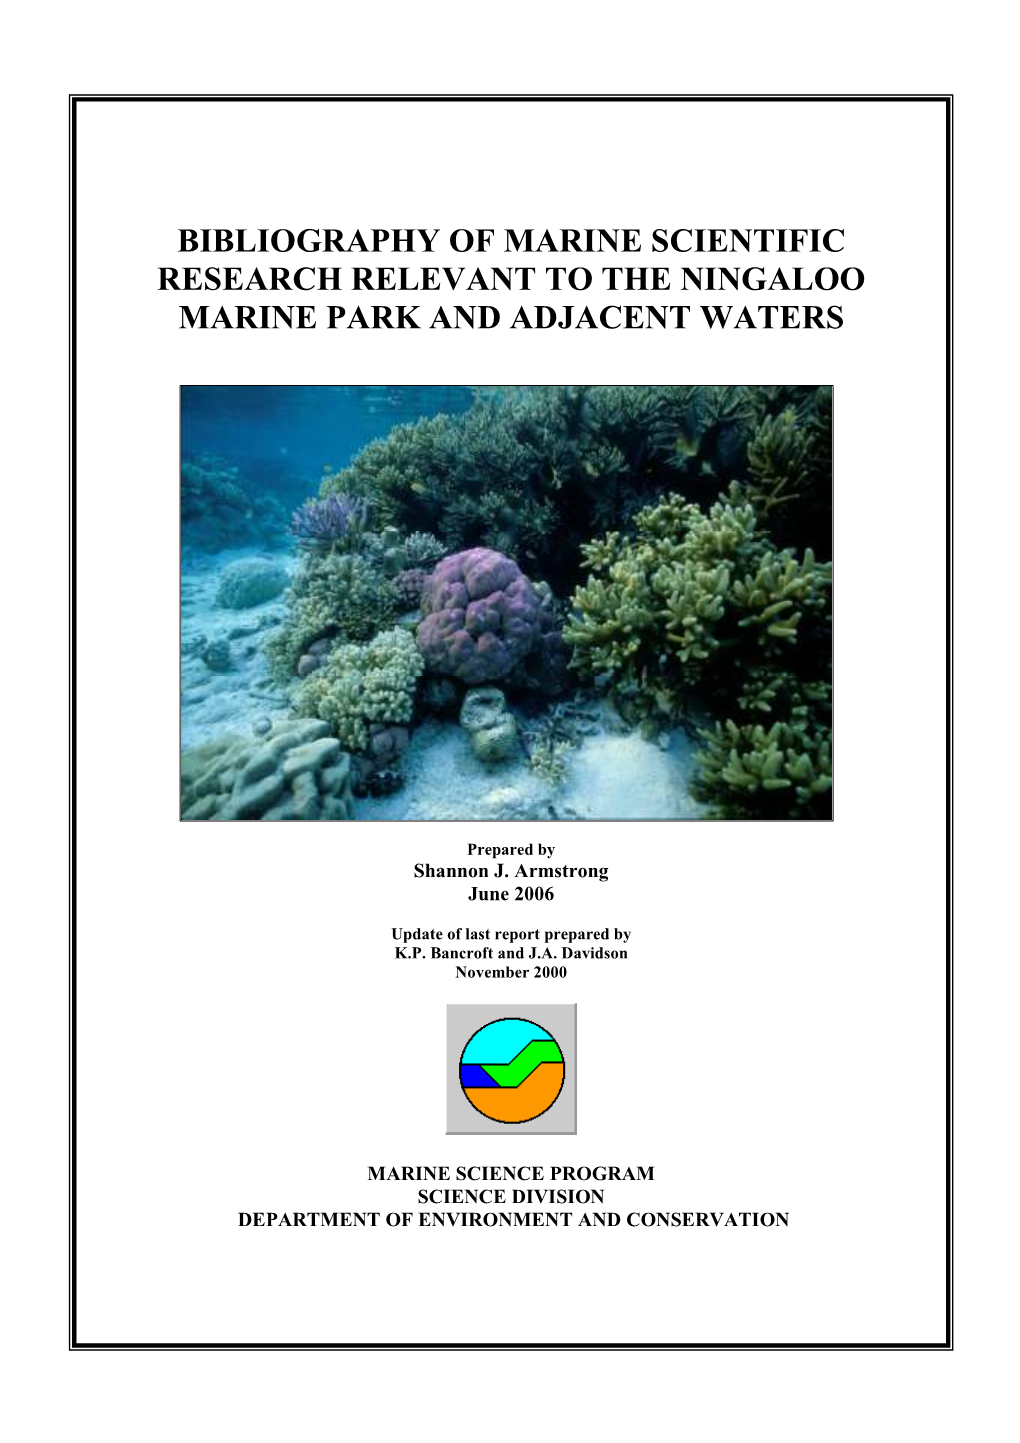 Bibliography of Marine Scientific Research Relevant to the Ningaloo Marine Park and Adjacent Waters